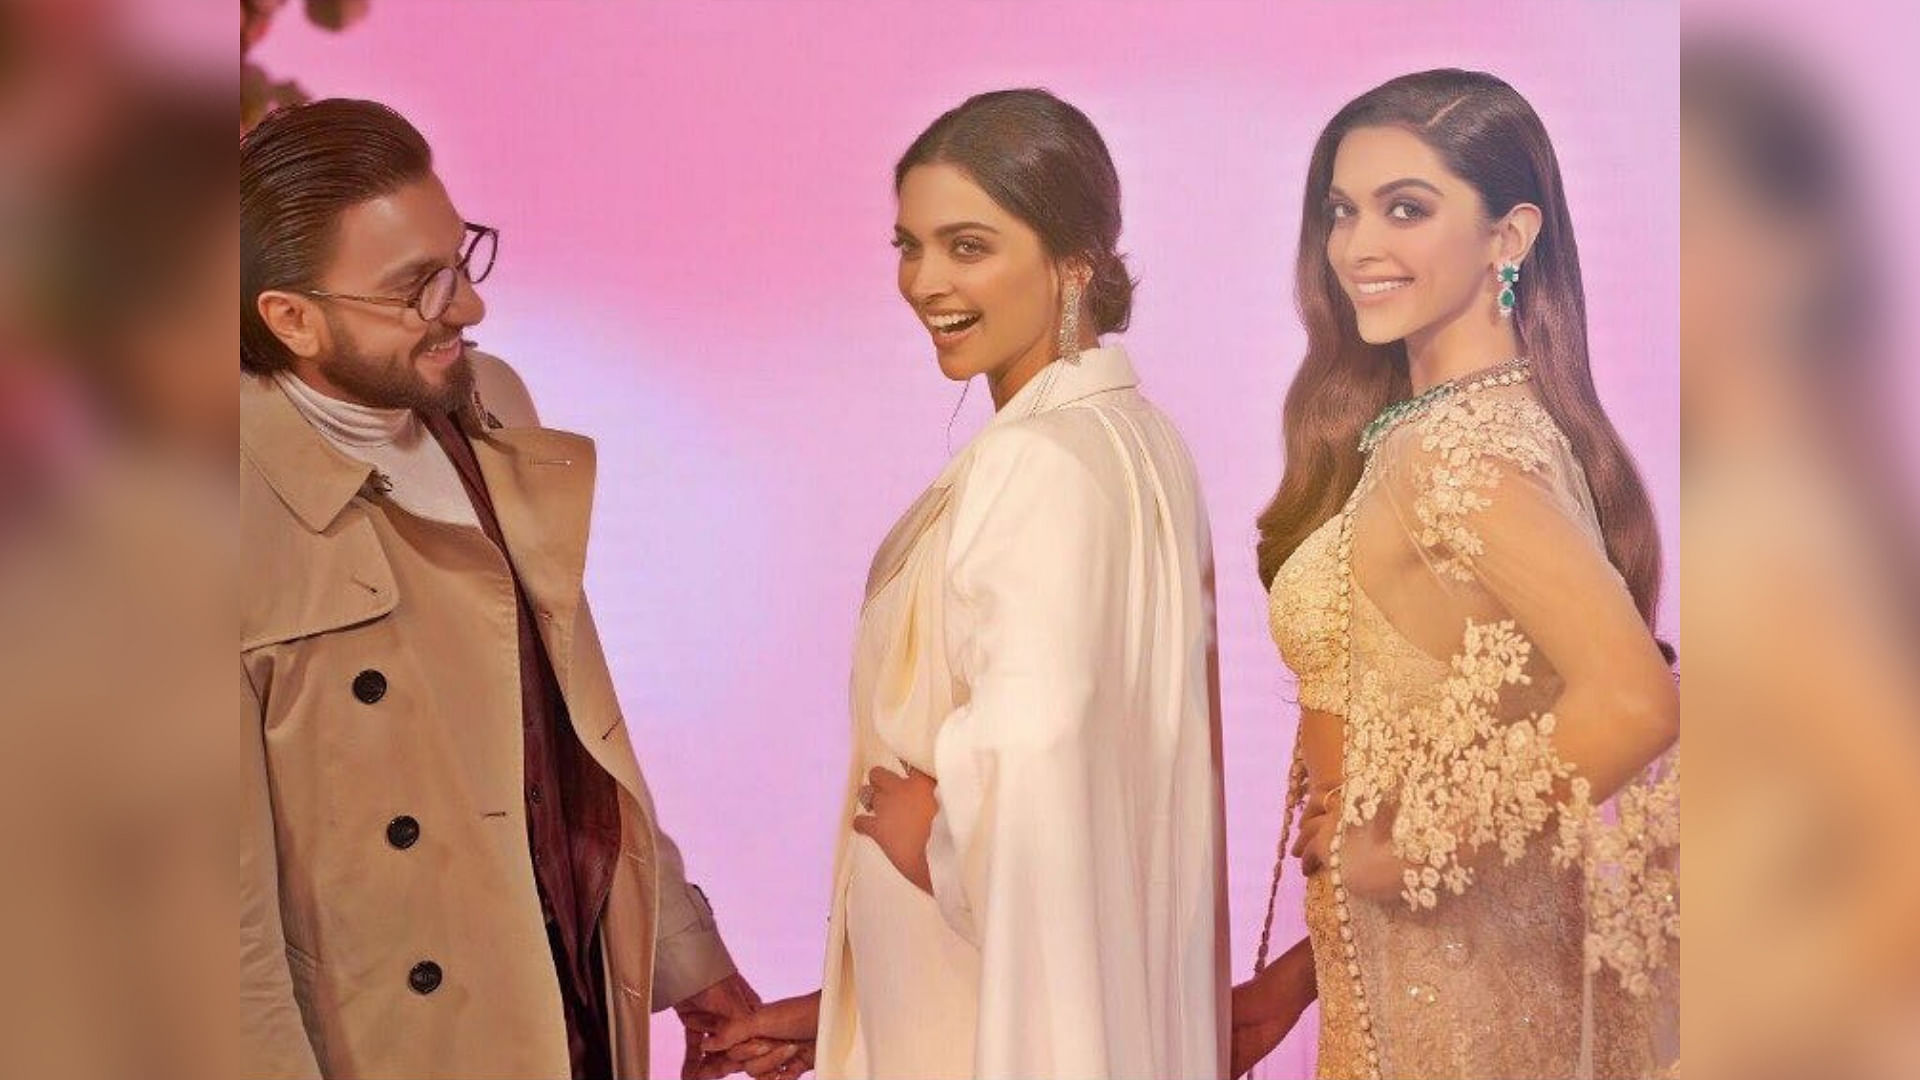 Ranveer Singh and Deepika Padukone at the unveiling of the latter’s wax statue at Madame Tussauds in London.